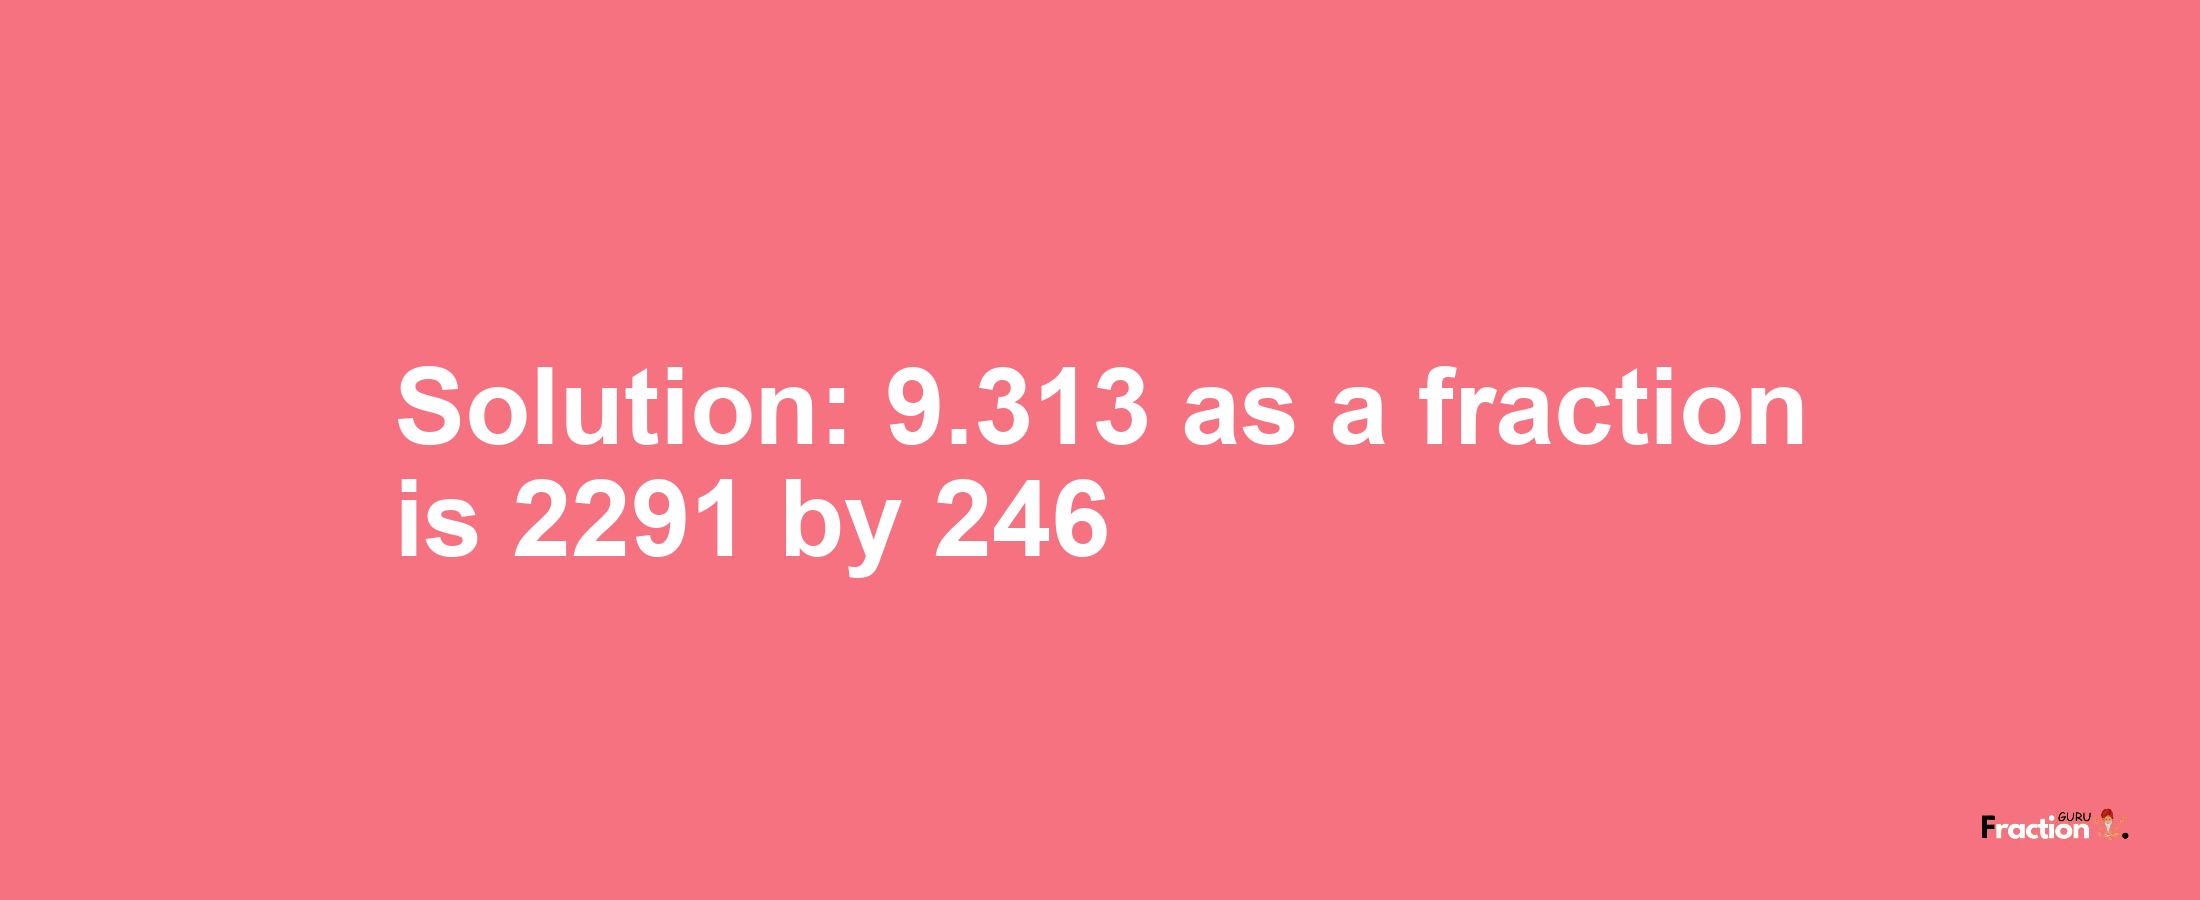 Solution:9.313 as a fraction is 2291/246